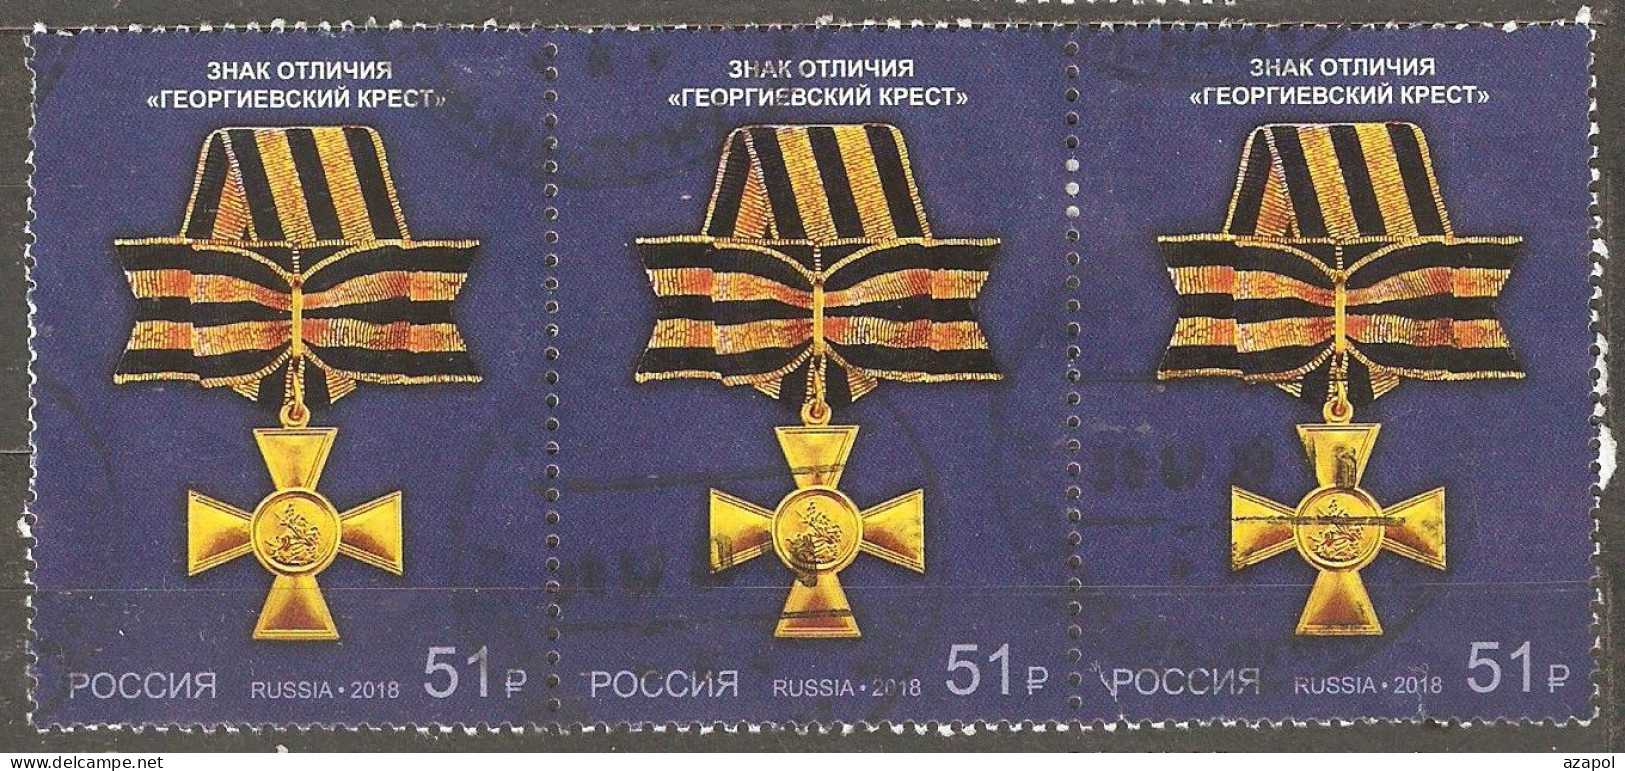 Russia: 1 Used Stamp Of A Set In Strip Of 3, State Awards Of Russian Federation - St. George's Cross, 2018, Mi#2647 - Used Stamps